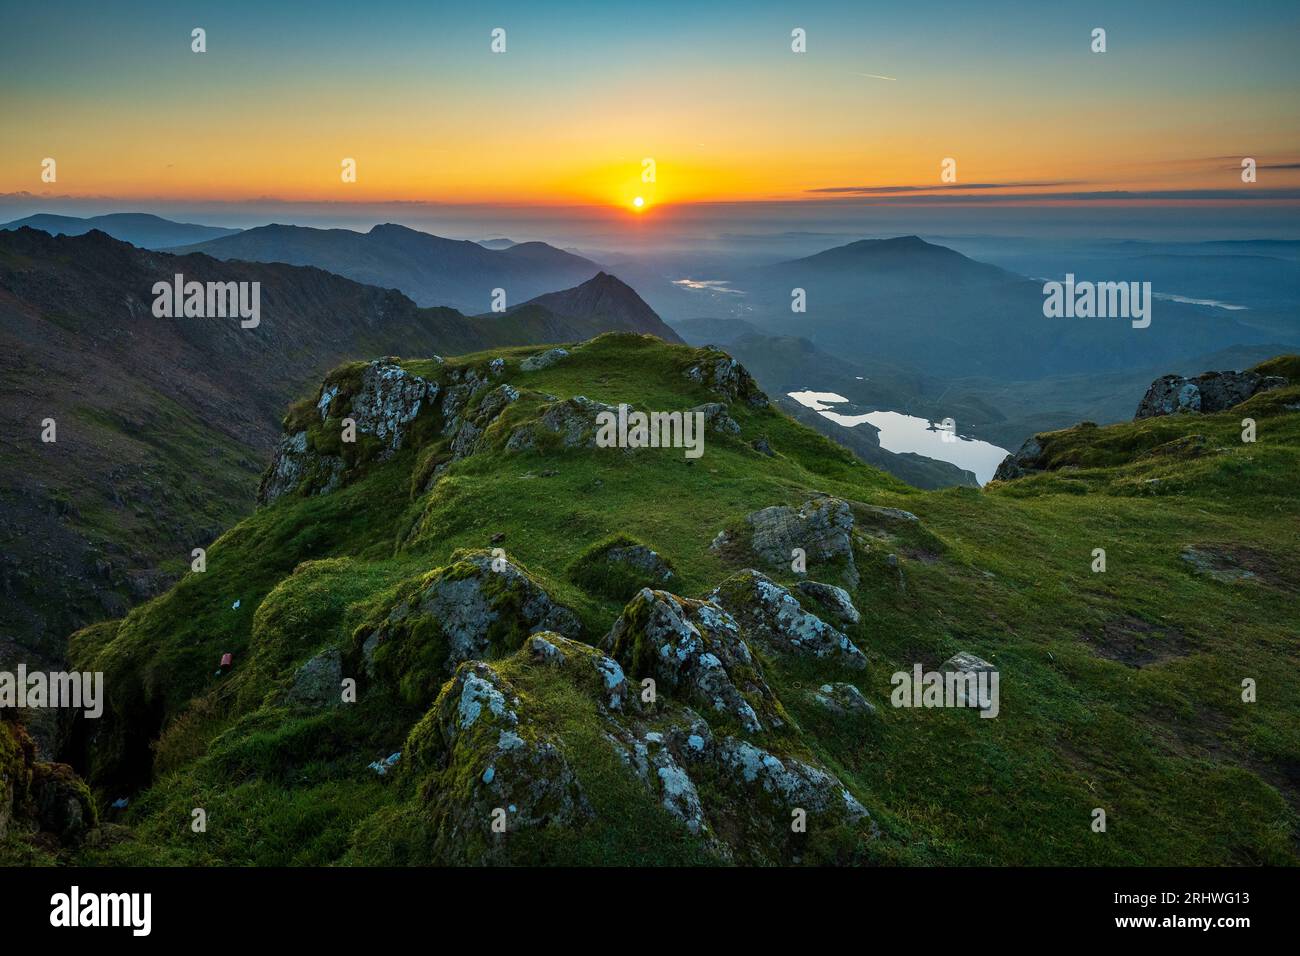 Snowdonia. The sunrise view fromthe top of Mount Snowdon, Yr Wyddfa, looking east towards Glaslyn lake ( nearest camera ) and Llyn Llydaw behind. Snow Stock Photo